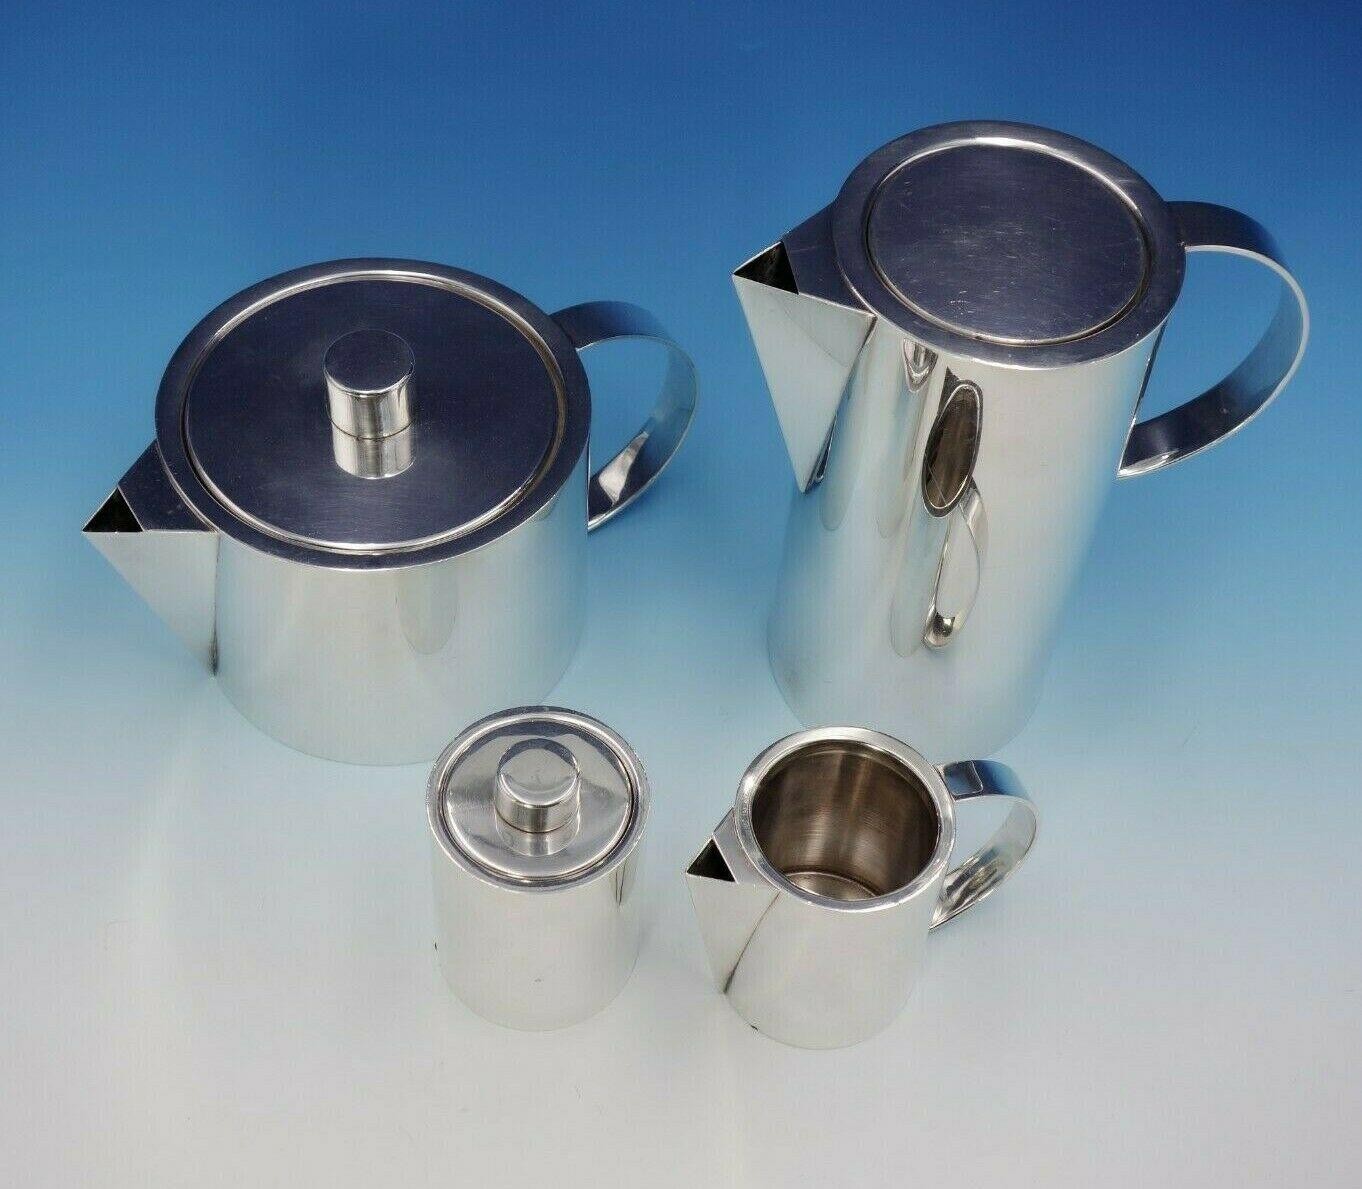 Swid Powell Collection by Guido Galbiati

Exceptional Swid Powell Collection by Guido Galbiati 4-piece sterling silver tea set. This modernist set was made in Milano, Italy, and was retailed at Calvin Klein. This set includes:

1 - Coffee Pot: